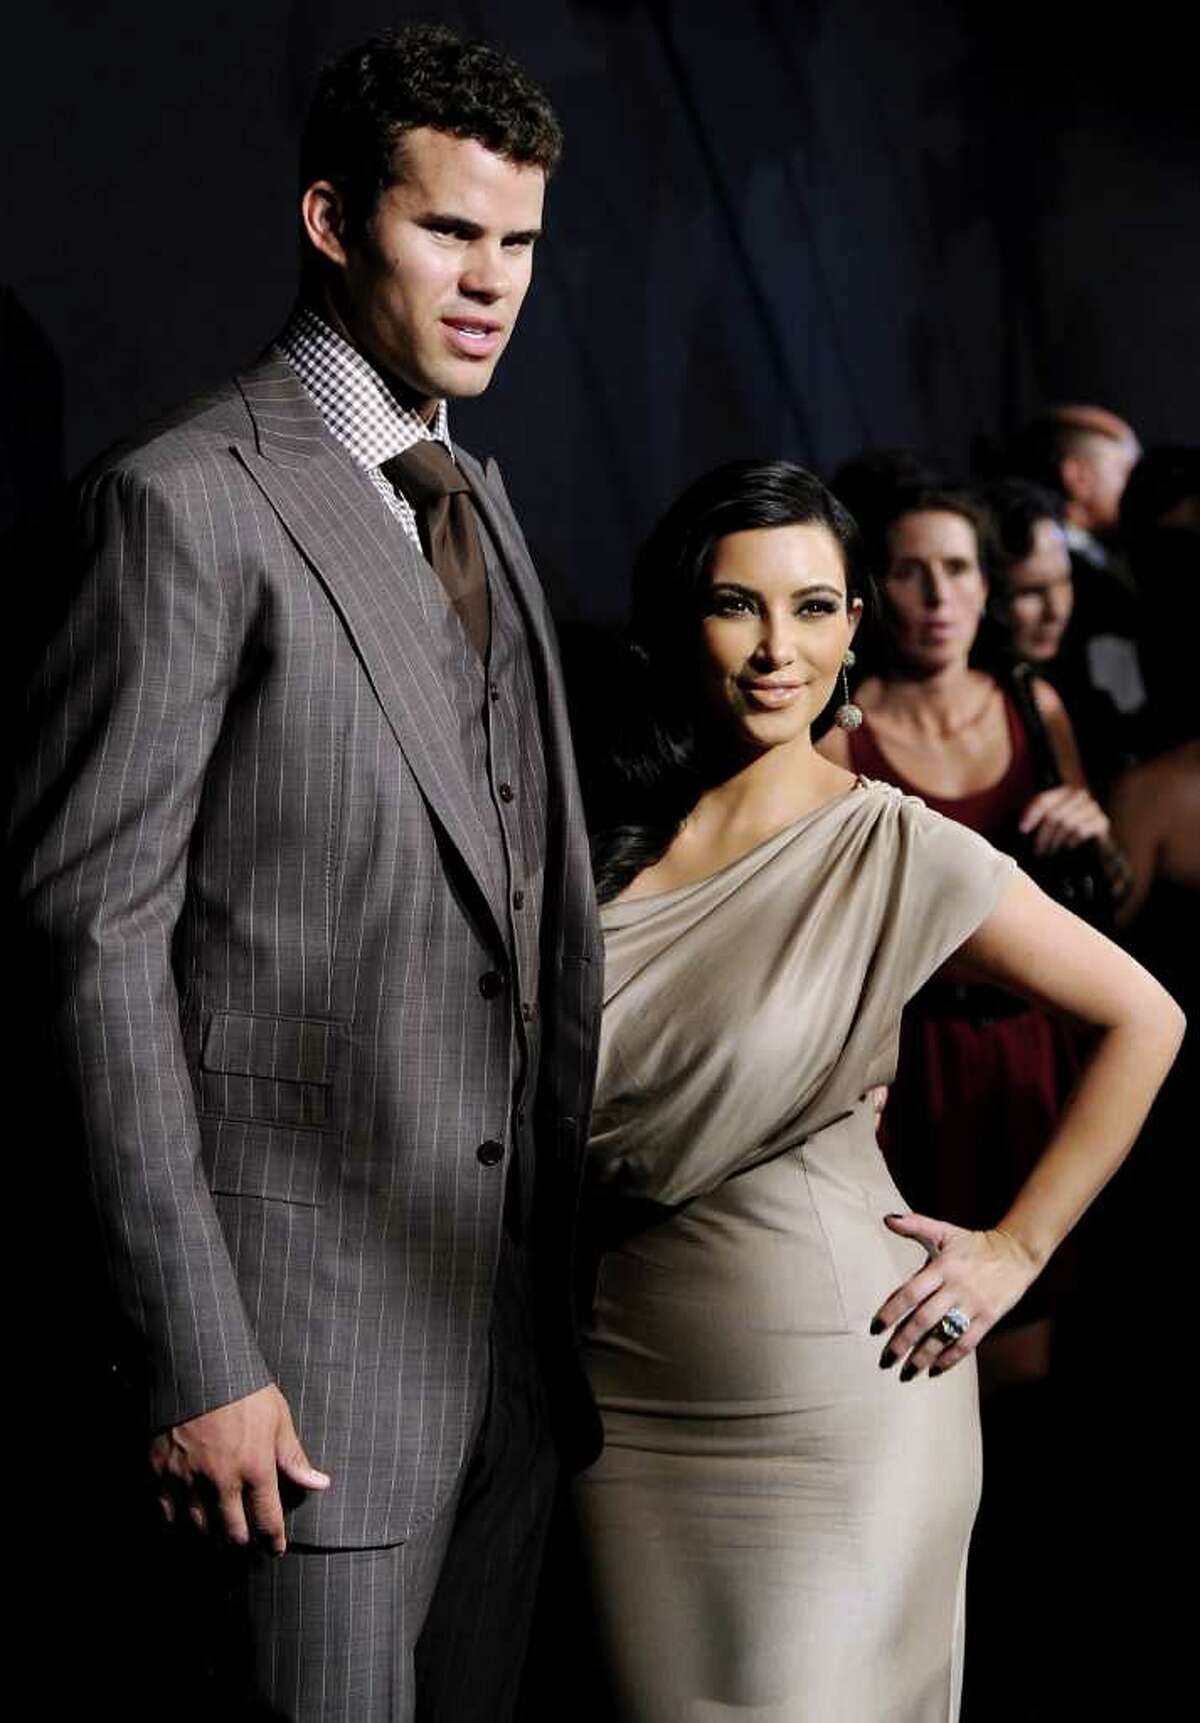 FILE - In this Aug. 31, 2011 file photo, newlyweds Kim Kardashian and Kris Humphries attend a party thrown in their honor at Capitale in New York. Humphries filed for an annulment of the couple's 72-day marriage on Thursday in Los Angeles. (AP Photo/Evan Agostini, file)